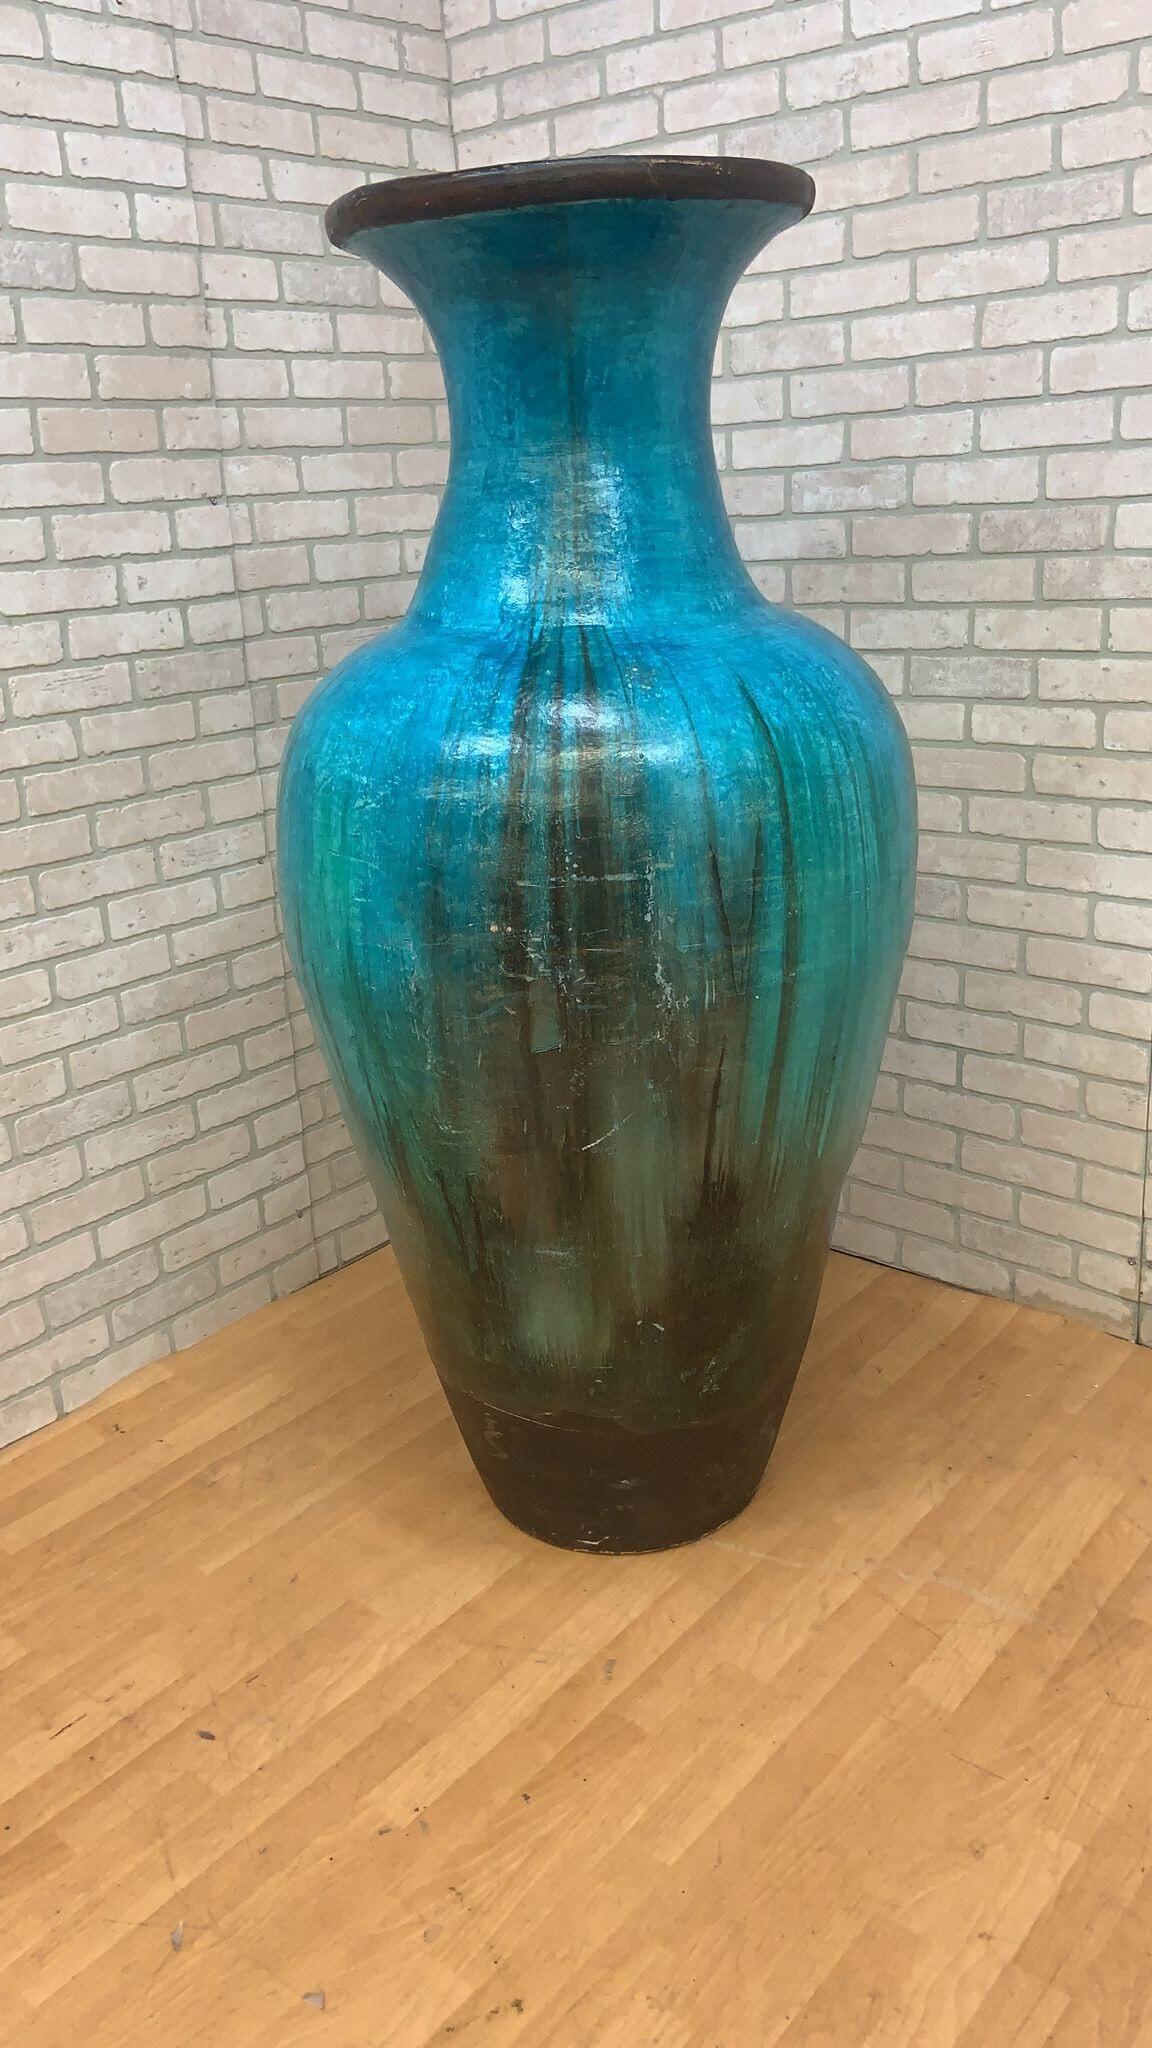 Vintage Teal Floor Vase

Add a pop of color and vintage vibes with the Teal Large Floor Vase.

Circa 1970

Dimensions:
H: 62